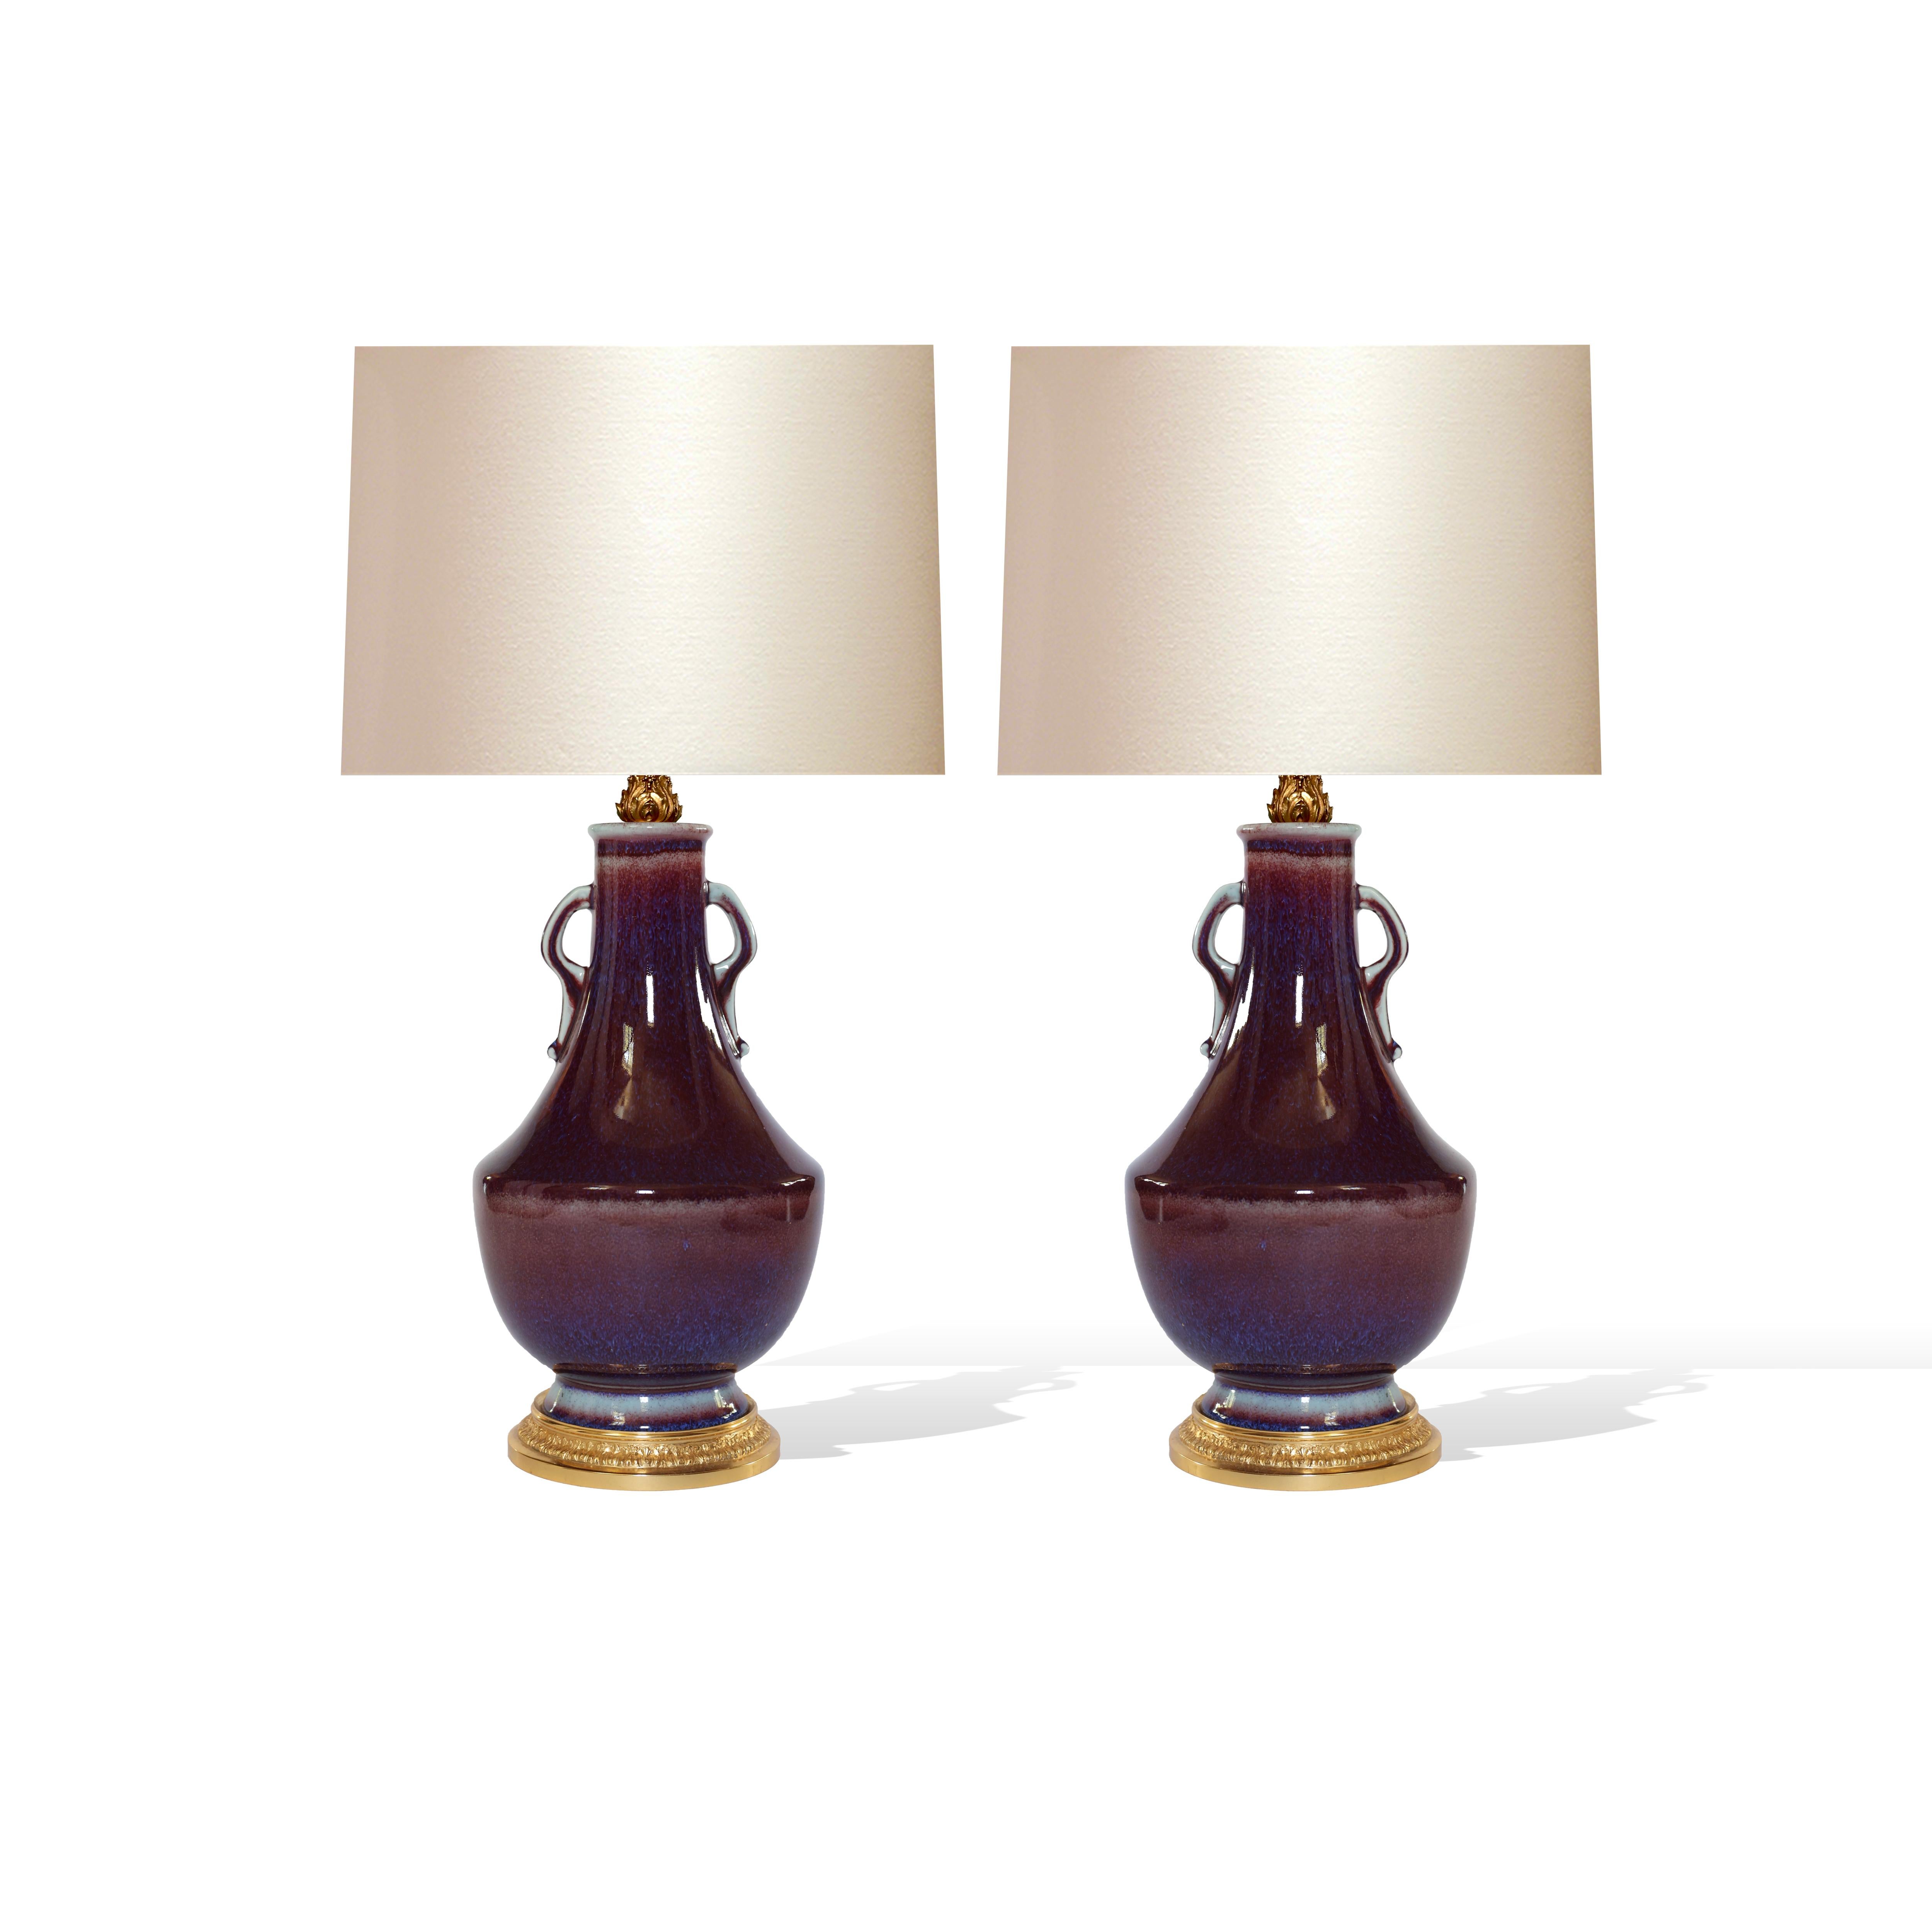 Pair of sang de Bouef porcelain lamps with gilt brass bases.
Lamp shade are not included.
To the top of the vase 14.5 inch.
Each lamp installed two large sockets,
150 w total.